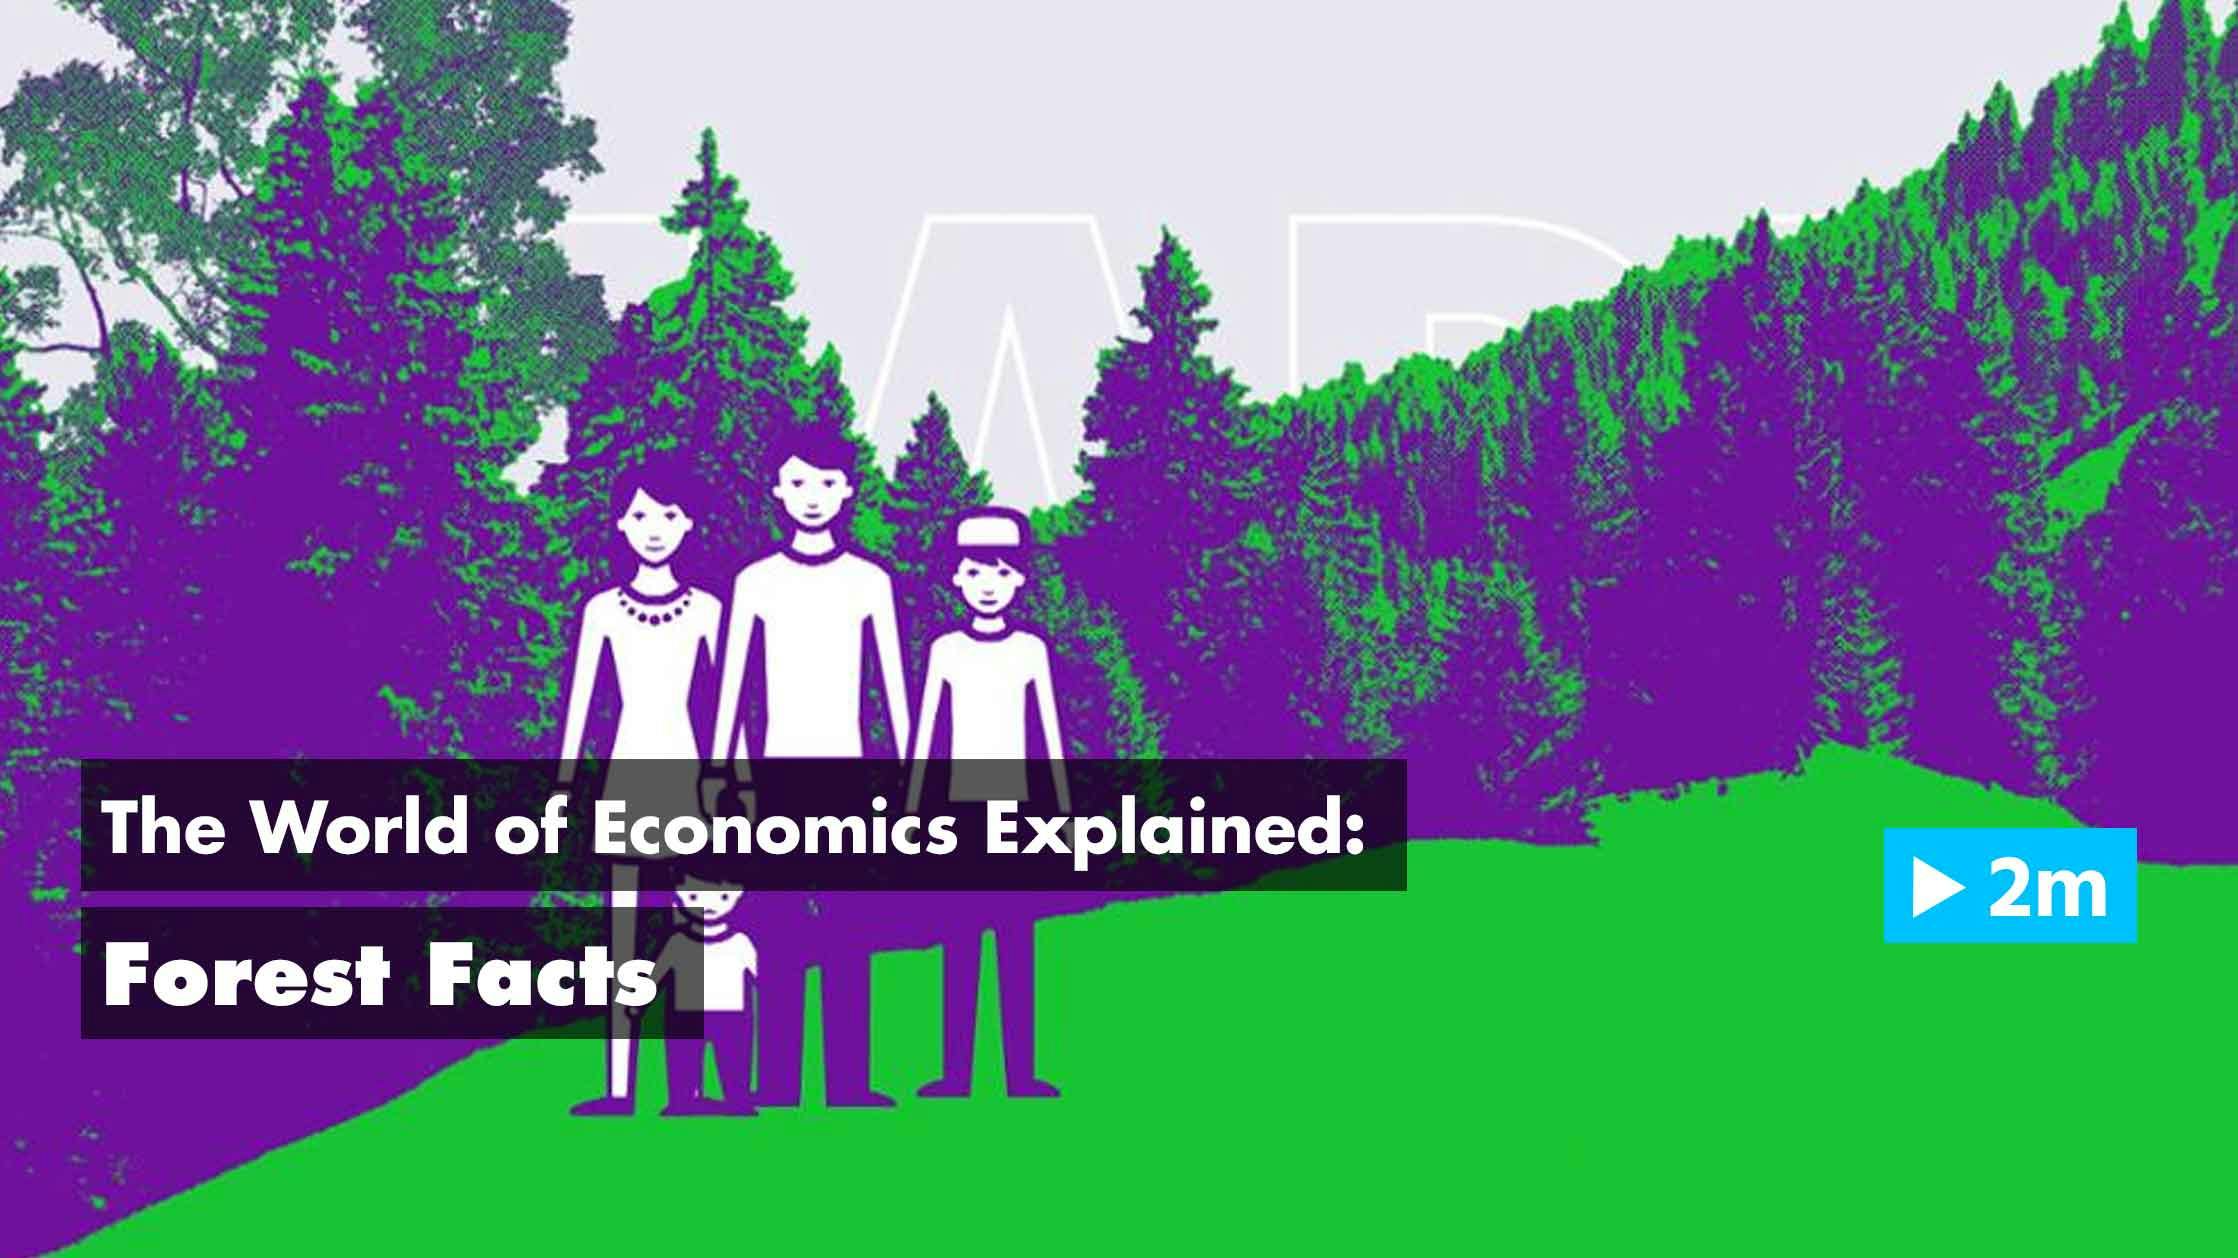 The World of Economics Explained: Forest Facts